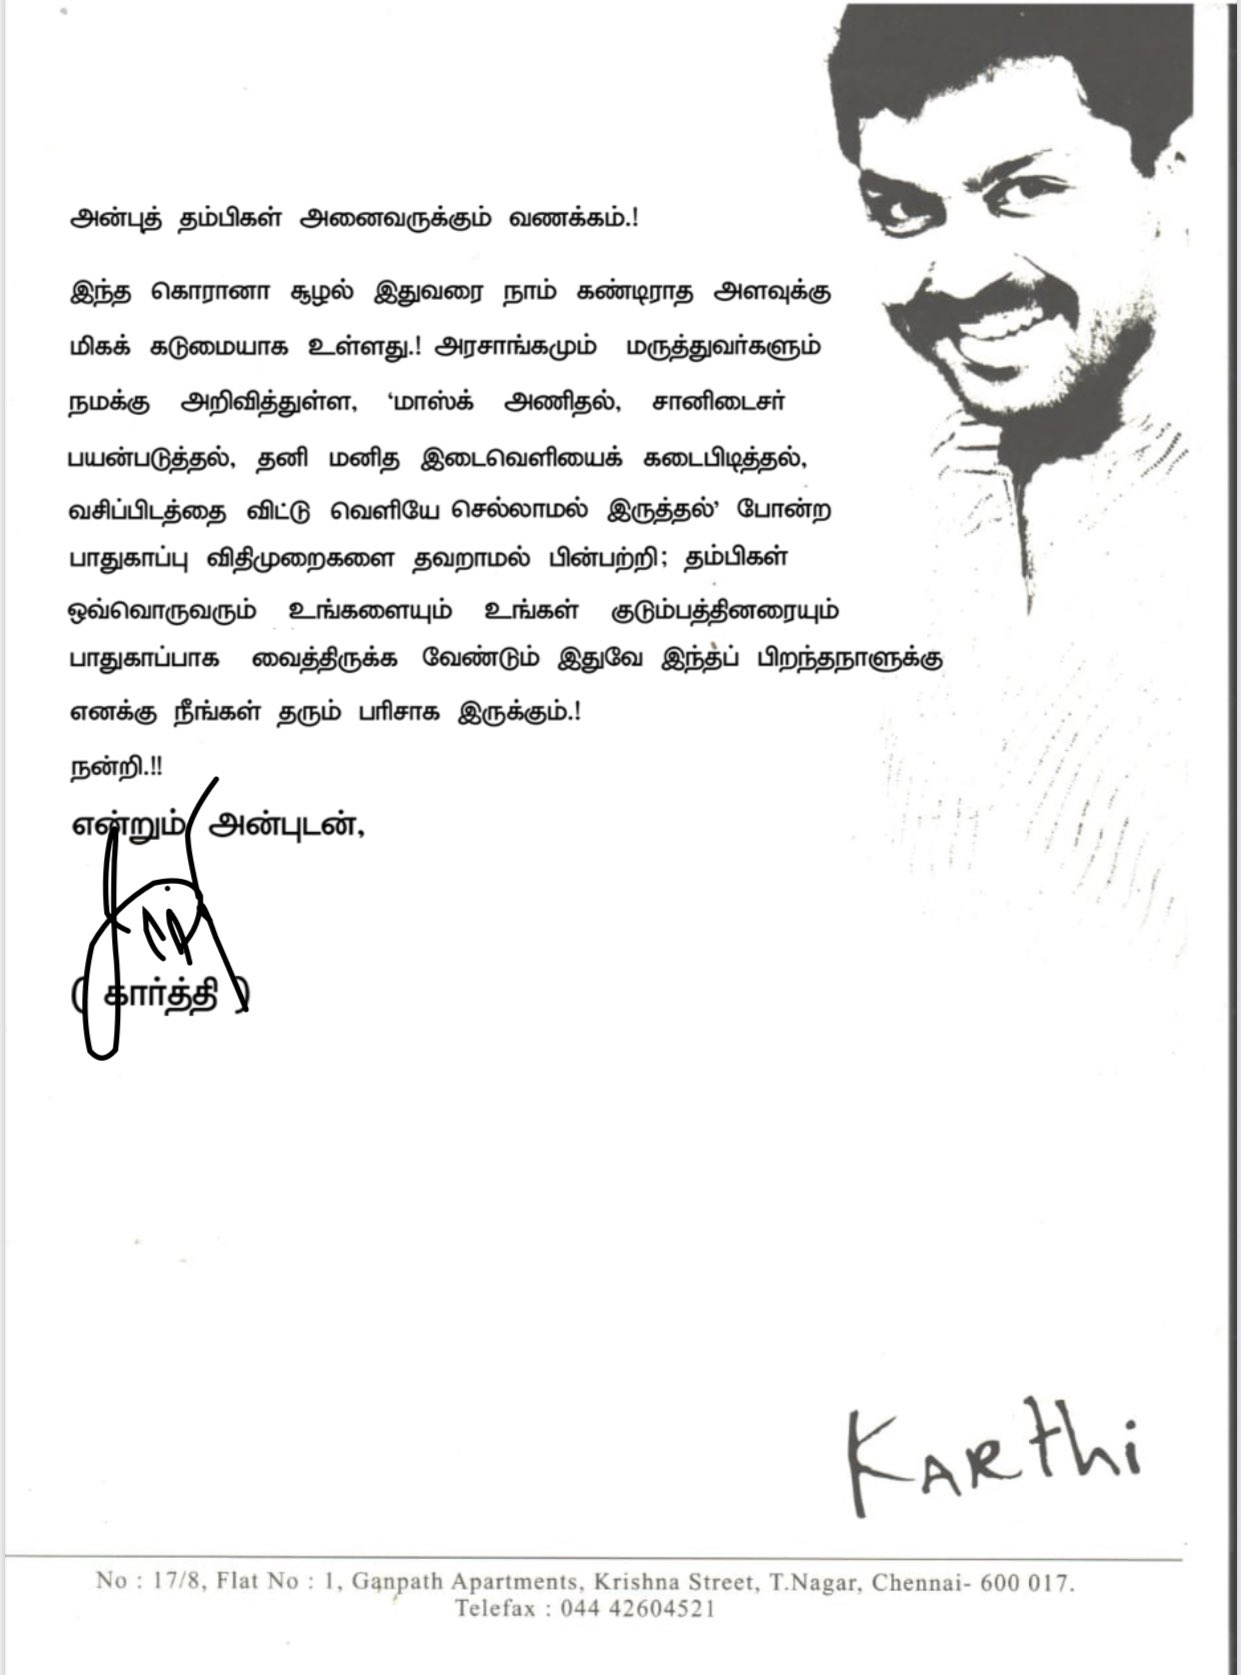 Actor Karthi birthday special - Touching letter to fans wins hearts - See trending pic here